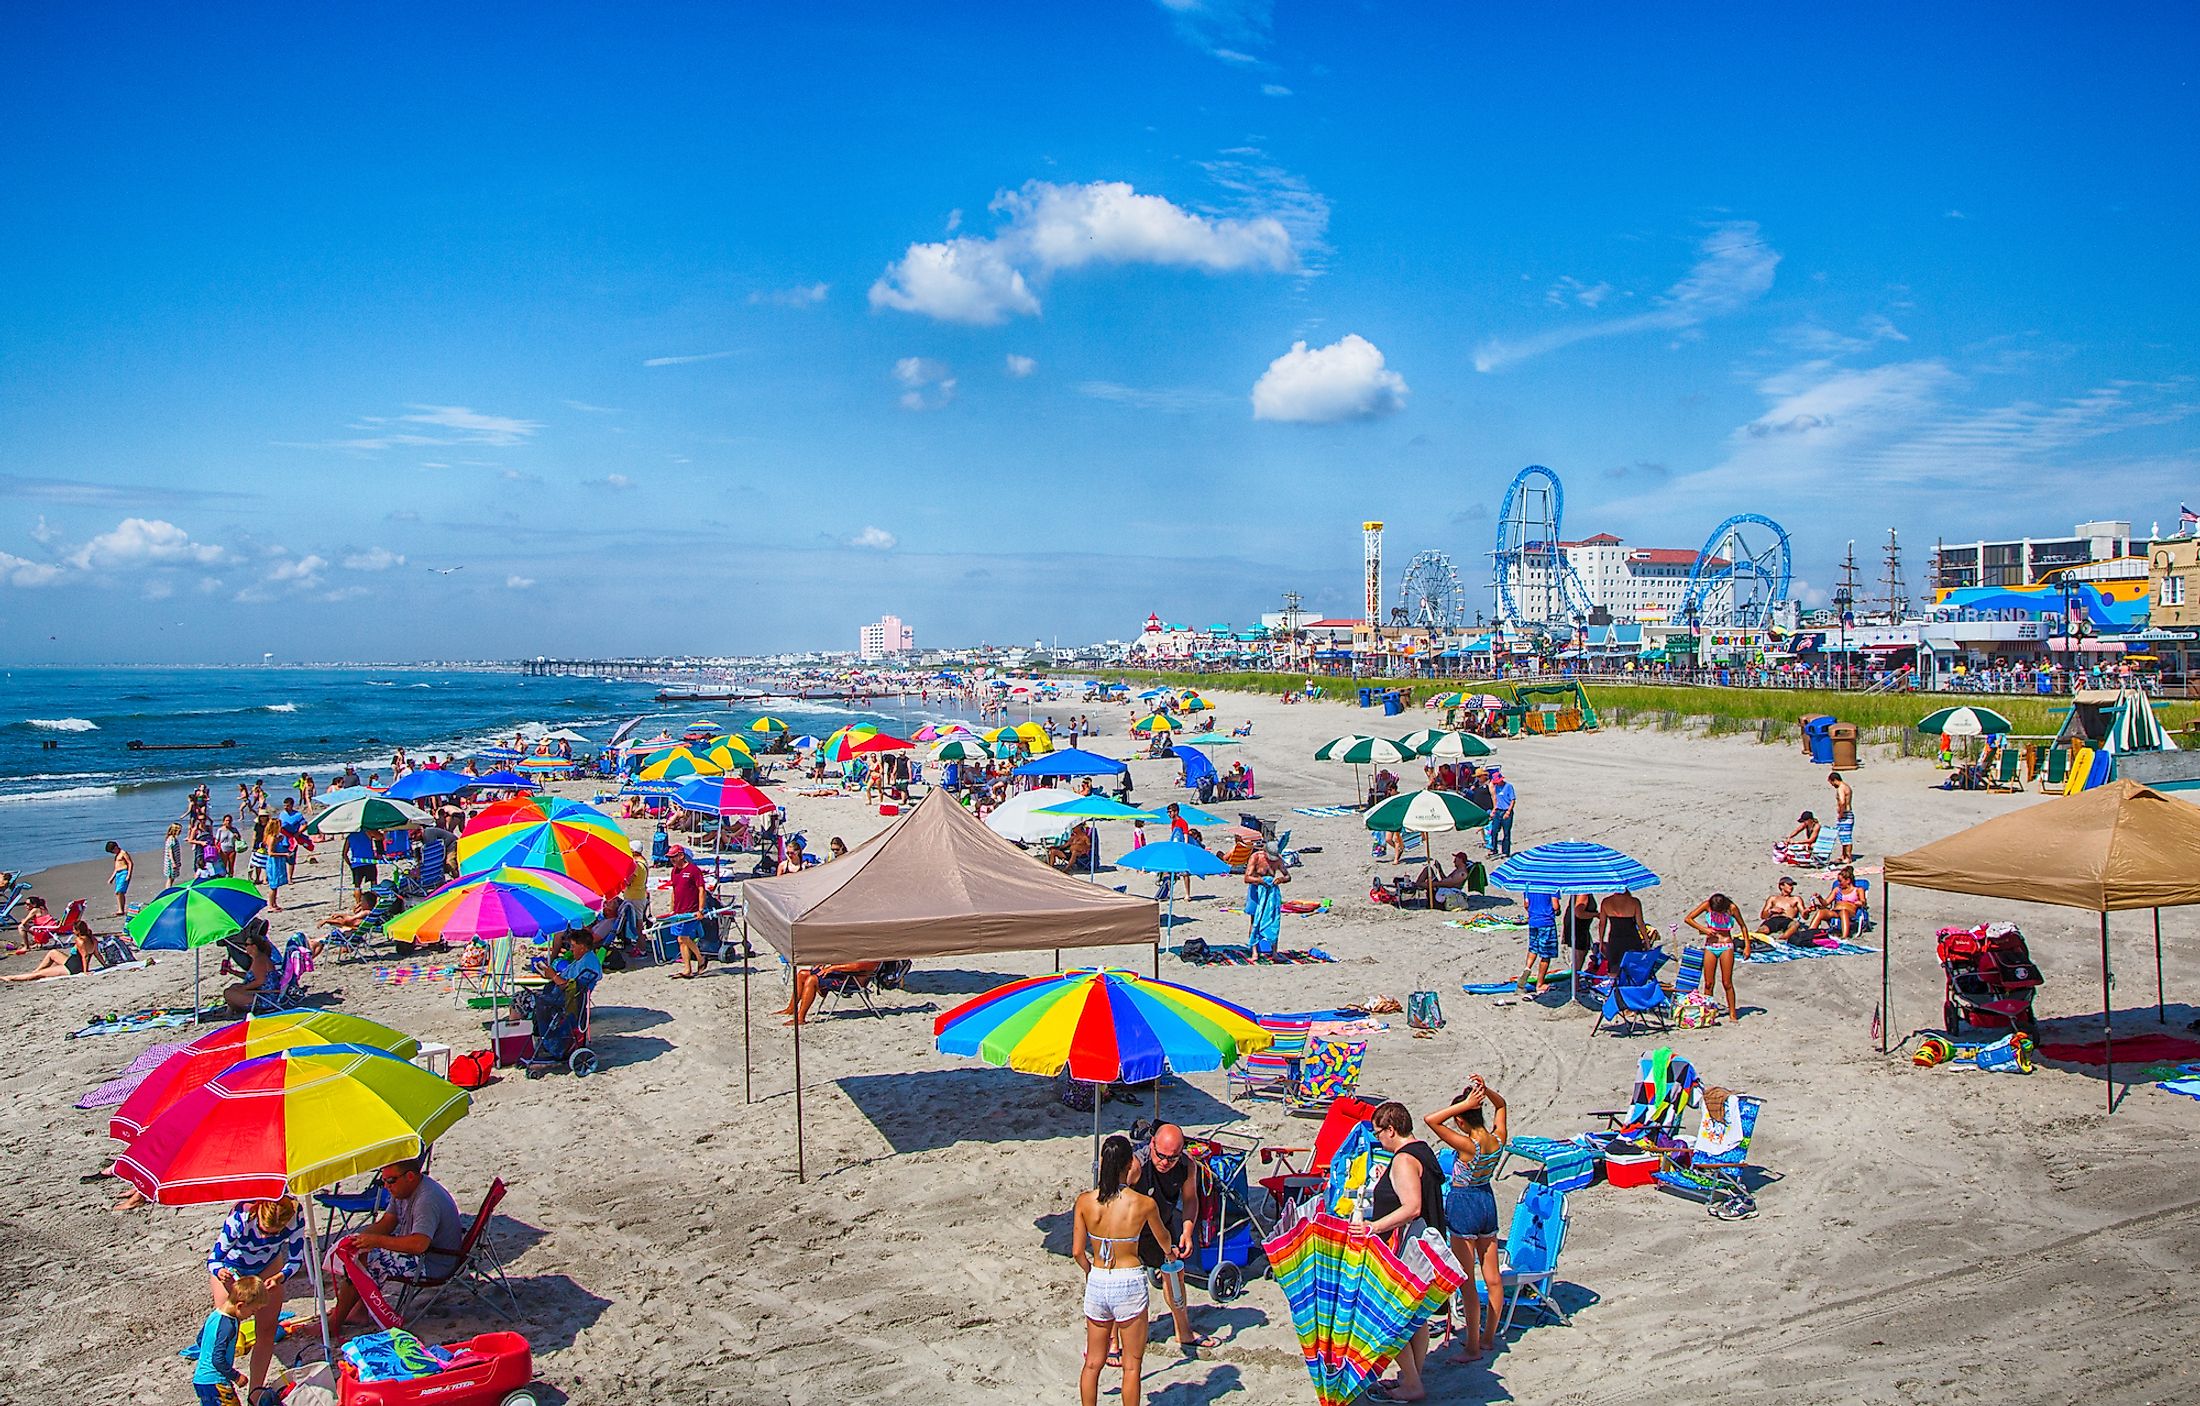 Vacationers enjoy the sun and sand in Ocean City. Editorial credit: Gary C. Tognoni / Shutterstock.com